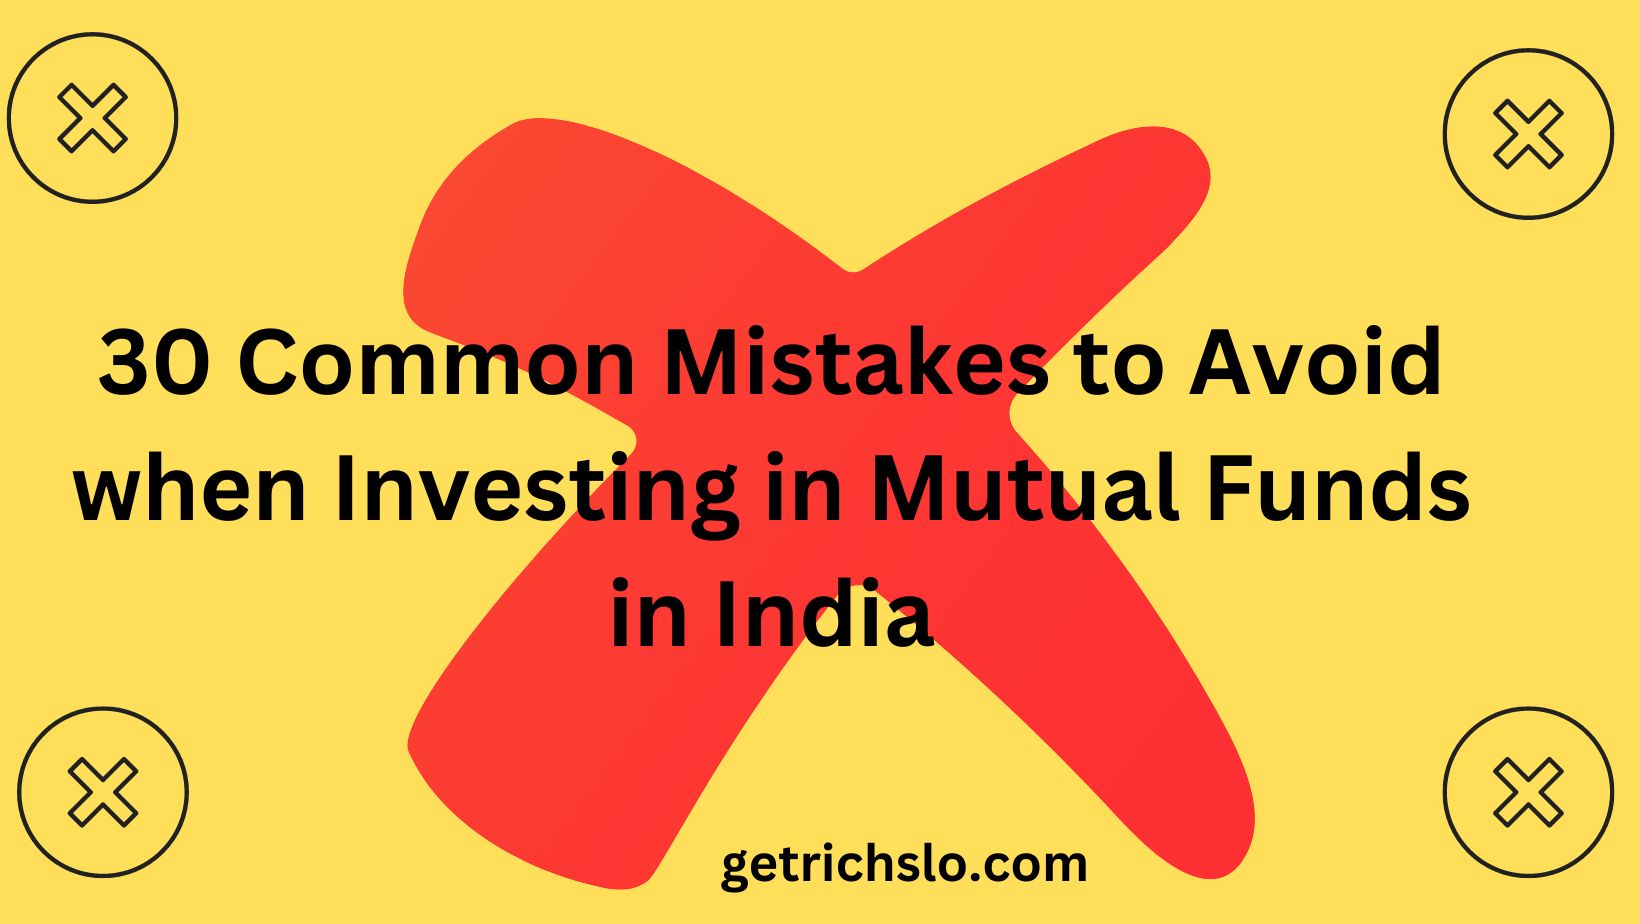 30 Common Mistakes to Avoid When Investing in Mutual Funds in India